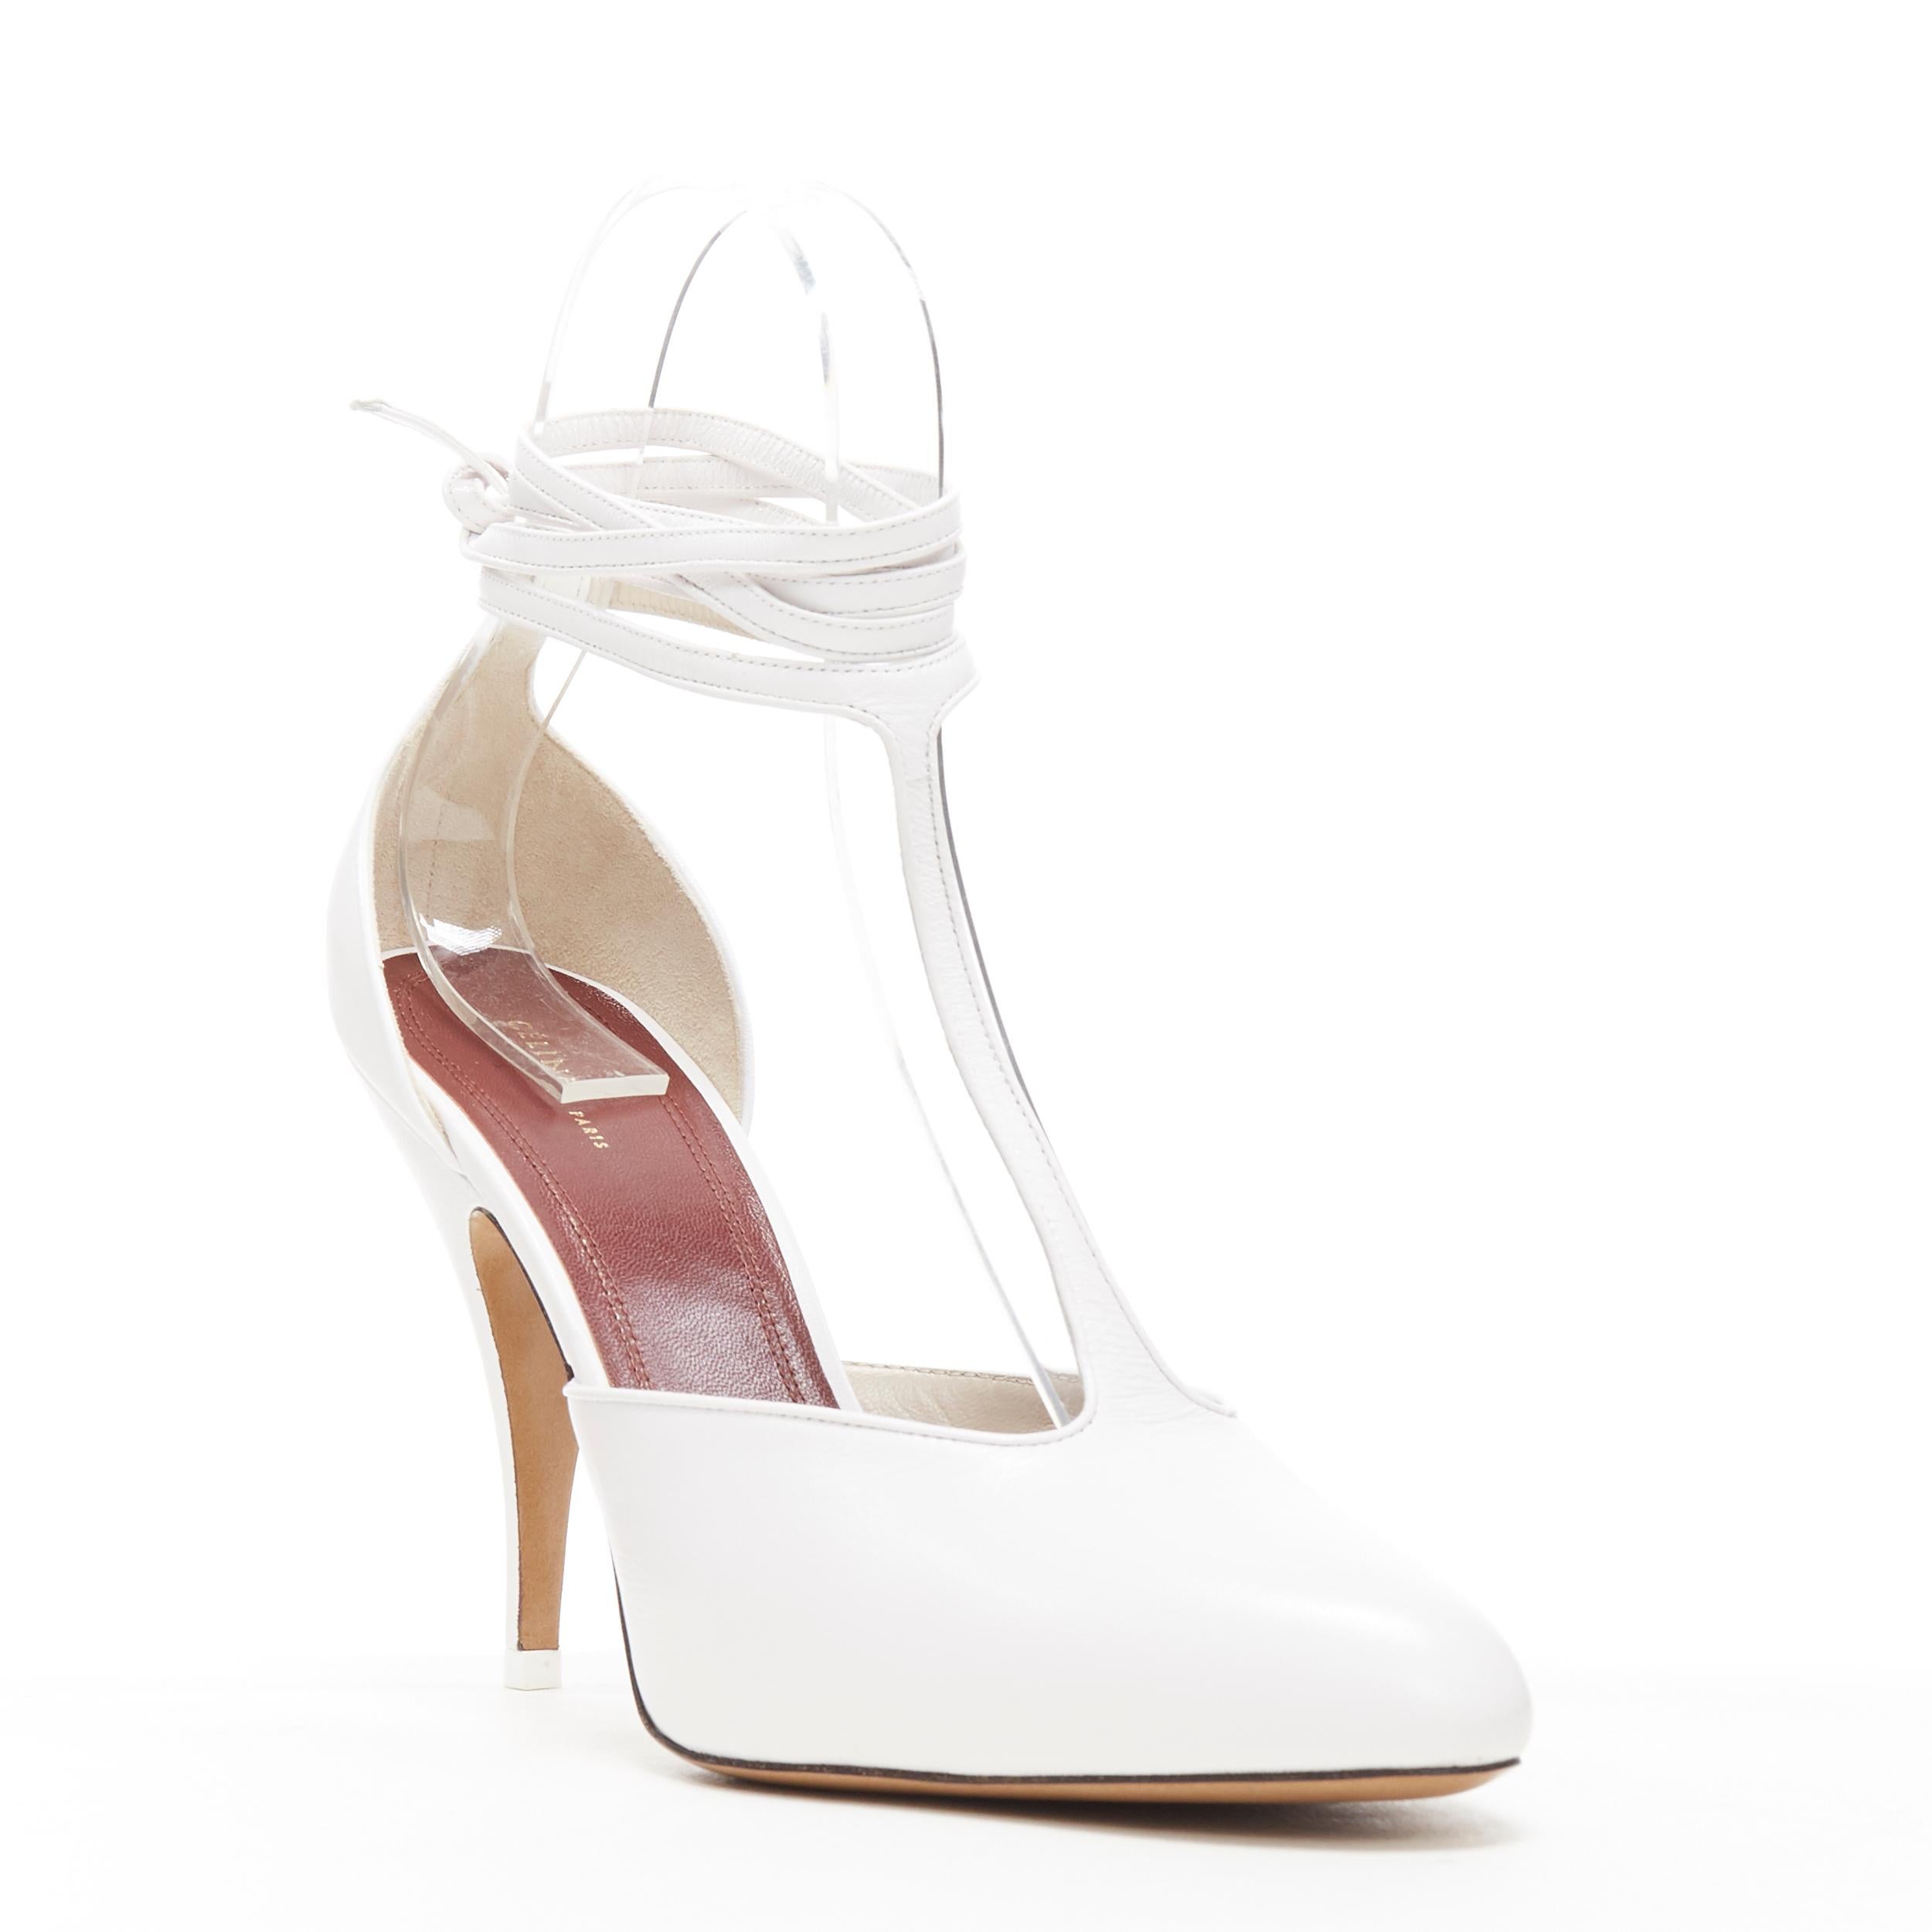 new OLD CELINE 2018 Night Out white wrap around ankle T-strap heels pump EU39
Brand: Celine
Designer: Phoebe Philo
Collection: Pre Fall 2018
Model Name / Style: Night Out
Material: Leather
Color: White
Pattern: Solid
Closure: Ankle strap
Extra